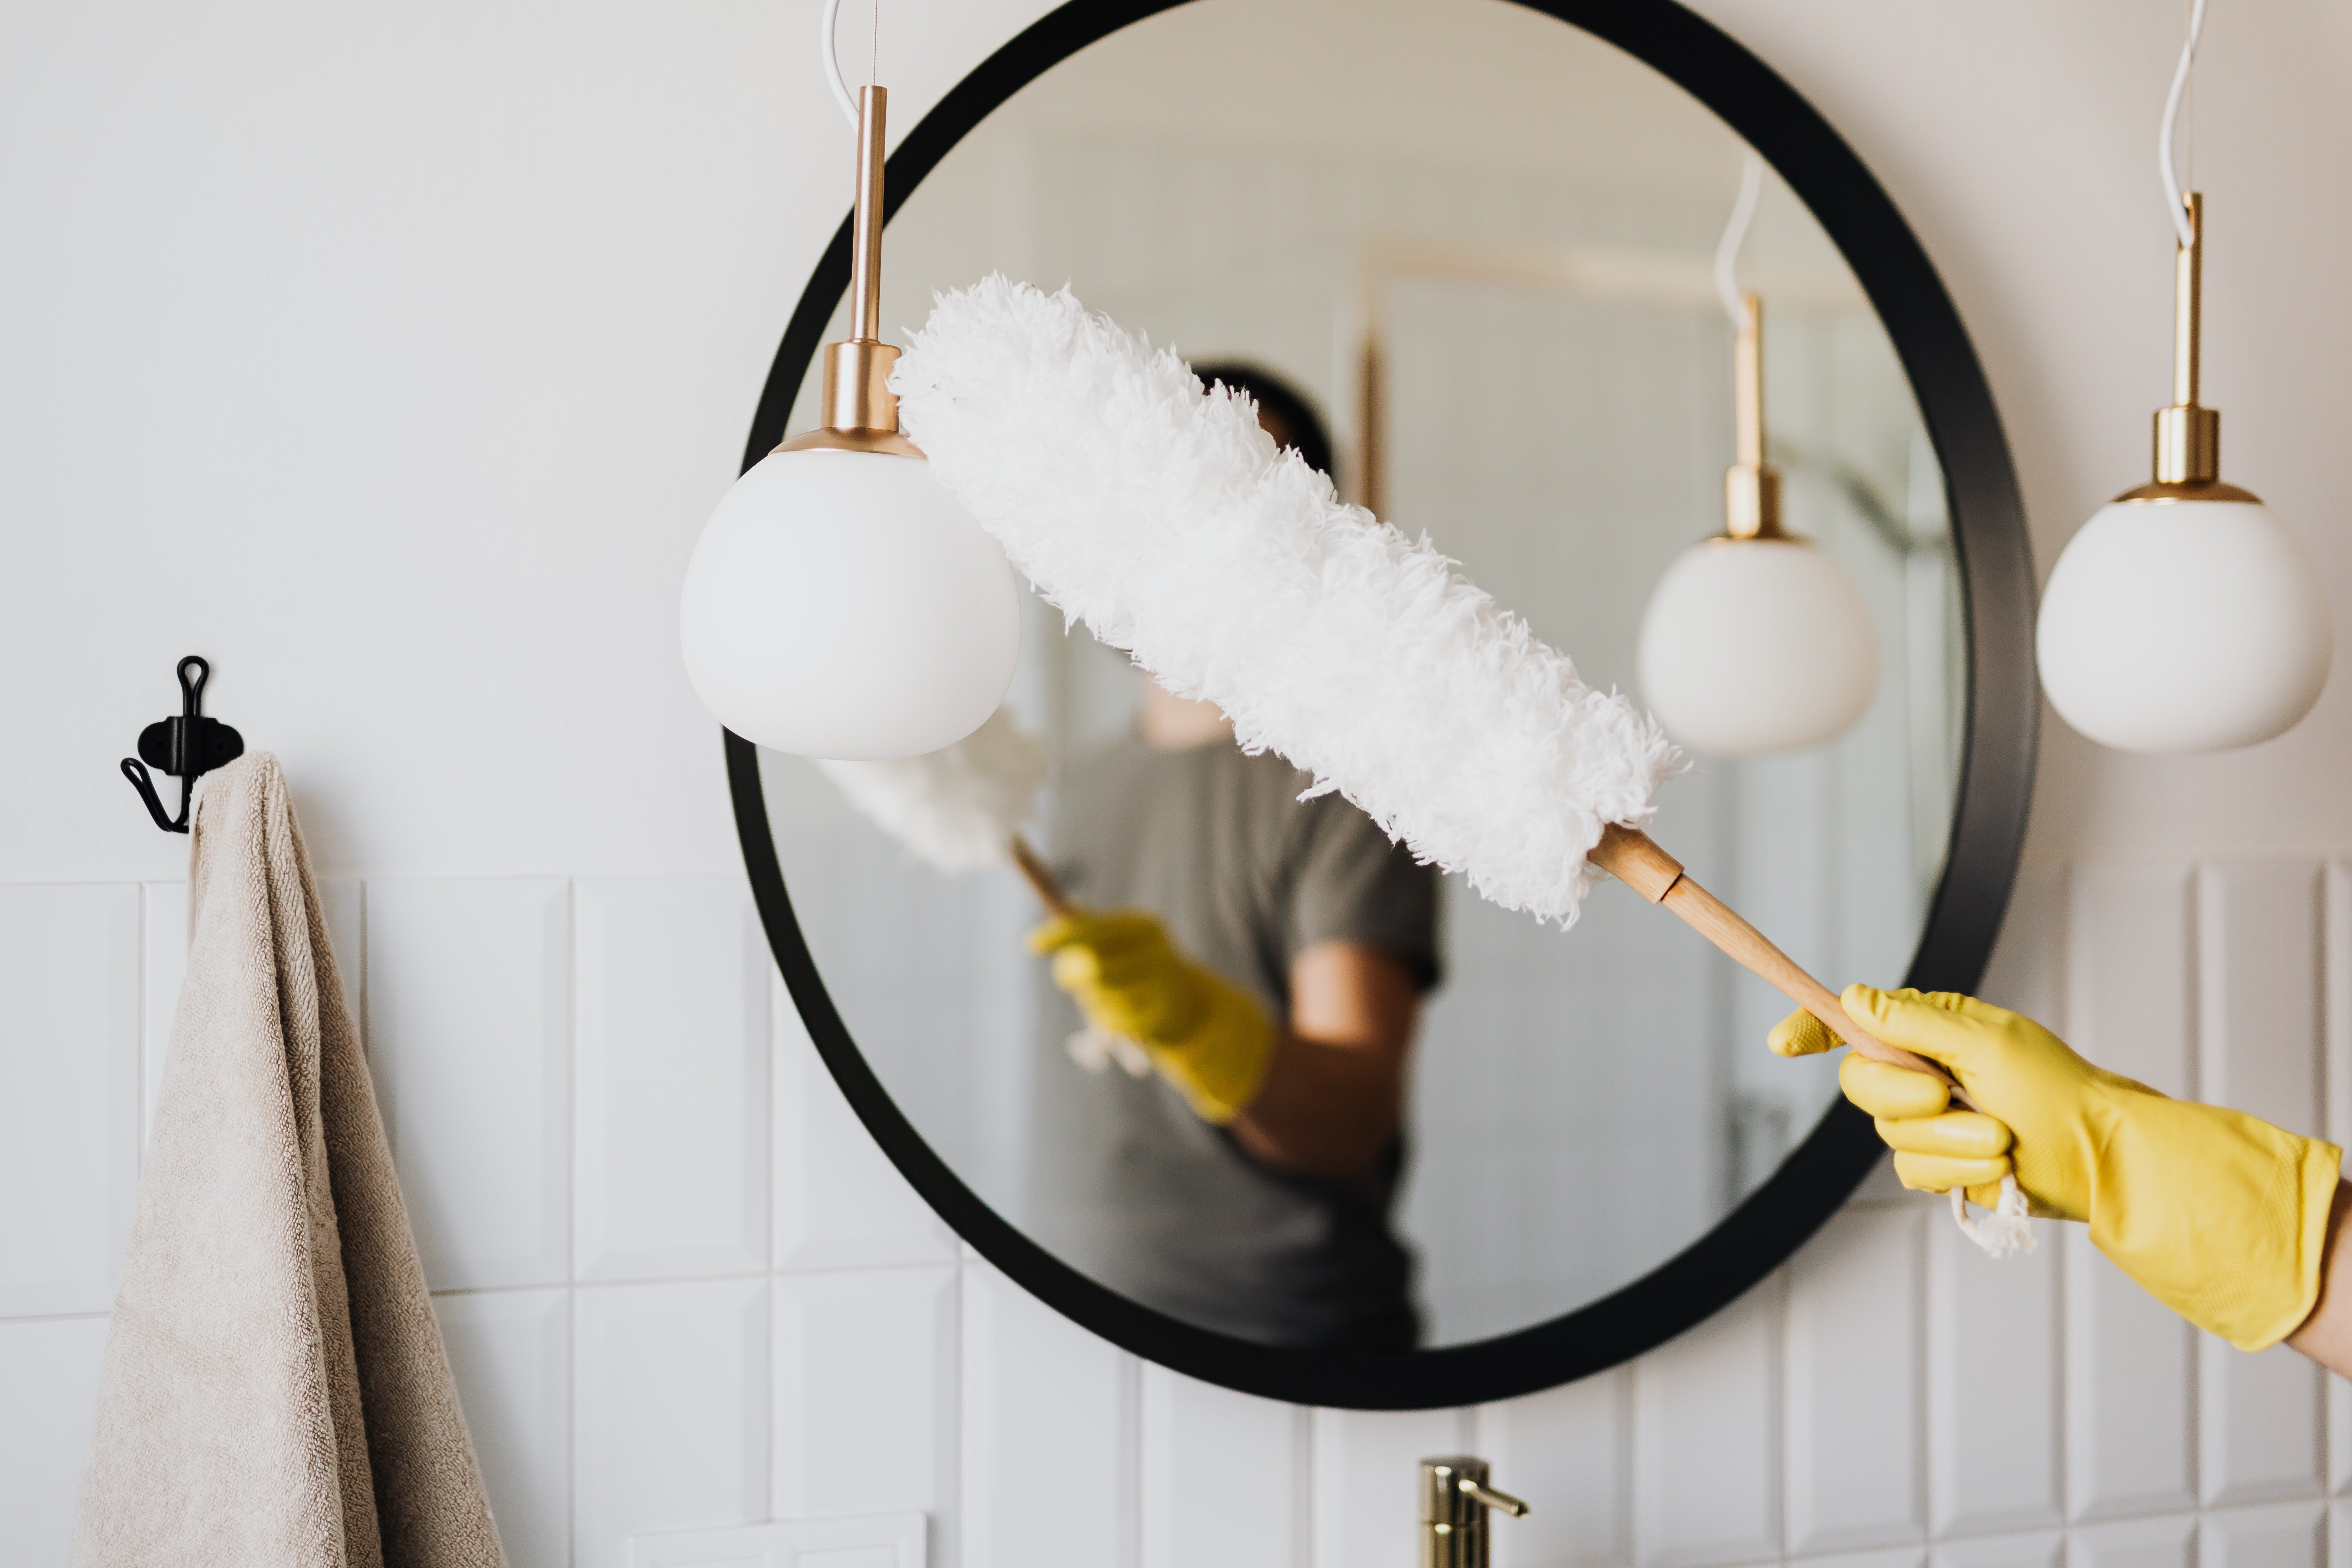 Pictured - An individual holding a microfiber duster | Source: Pexels 